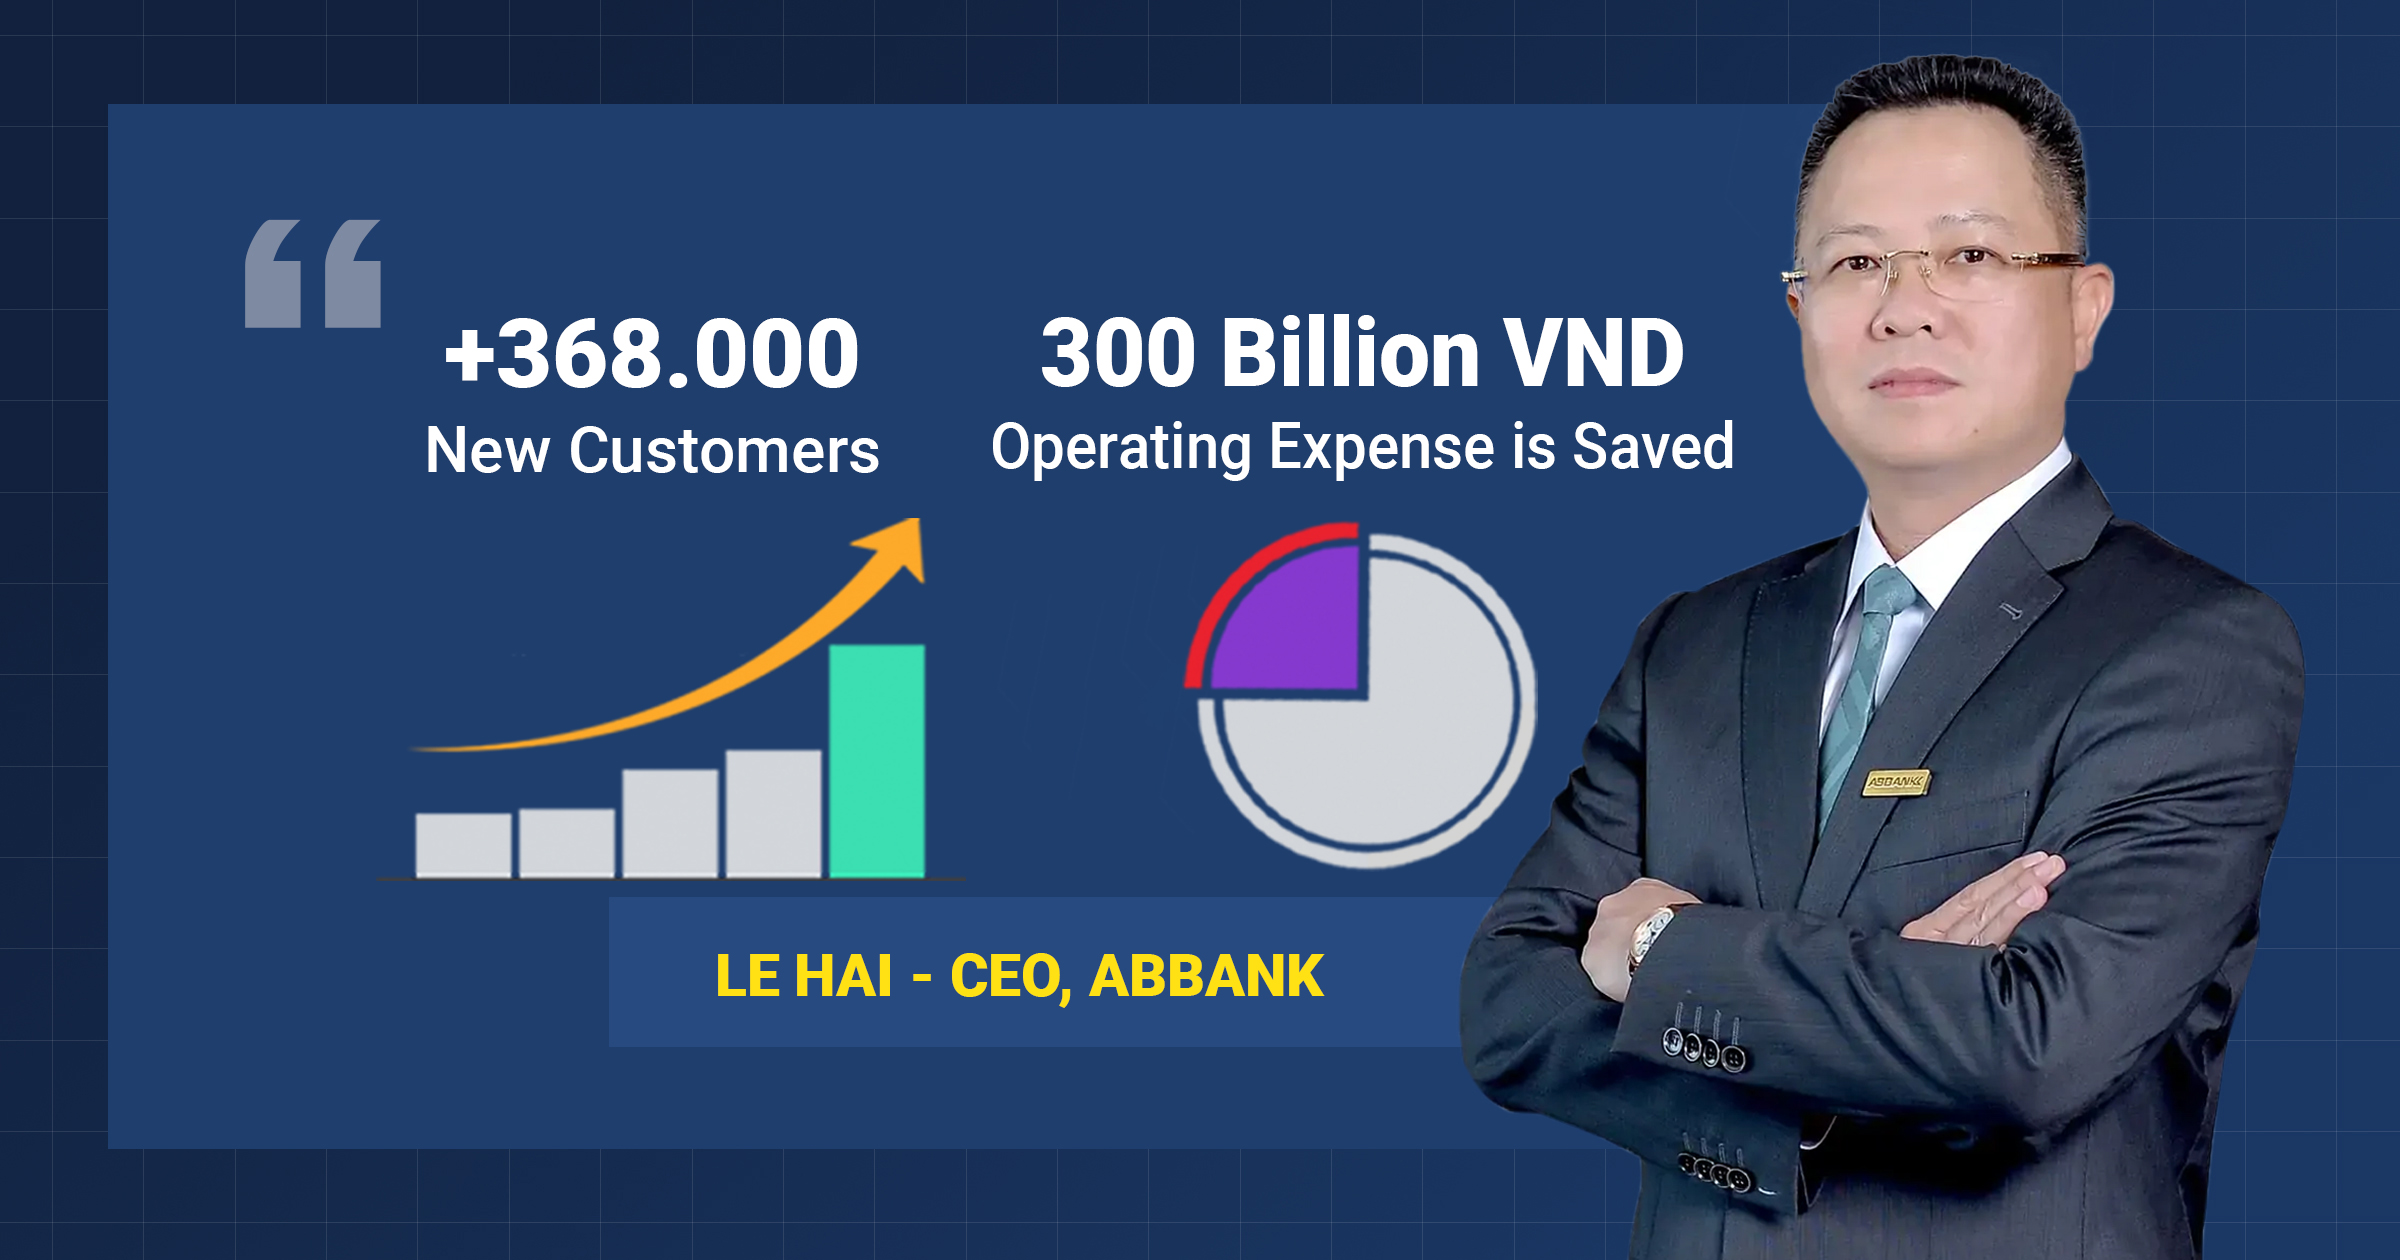 Le Hai CEO of ABBank highly appreciates the application of Smart Form